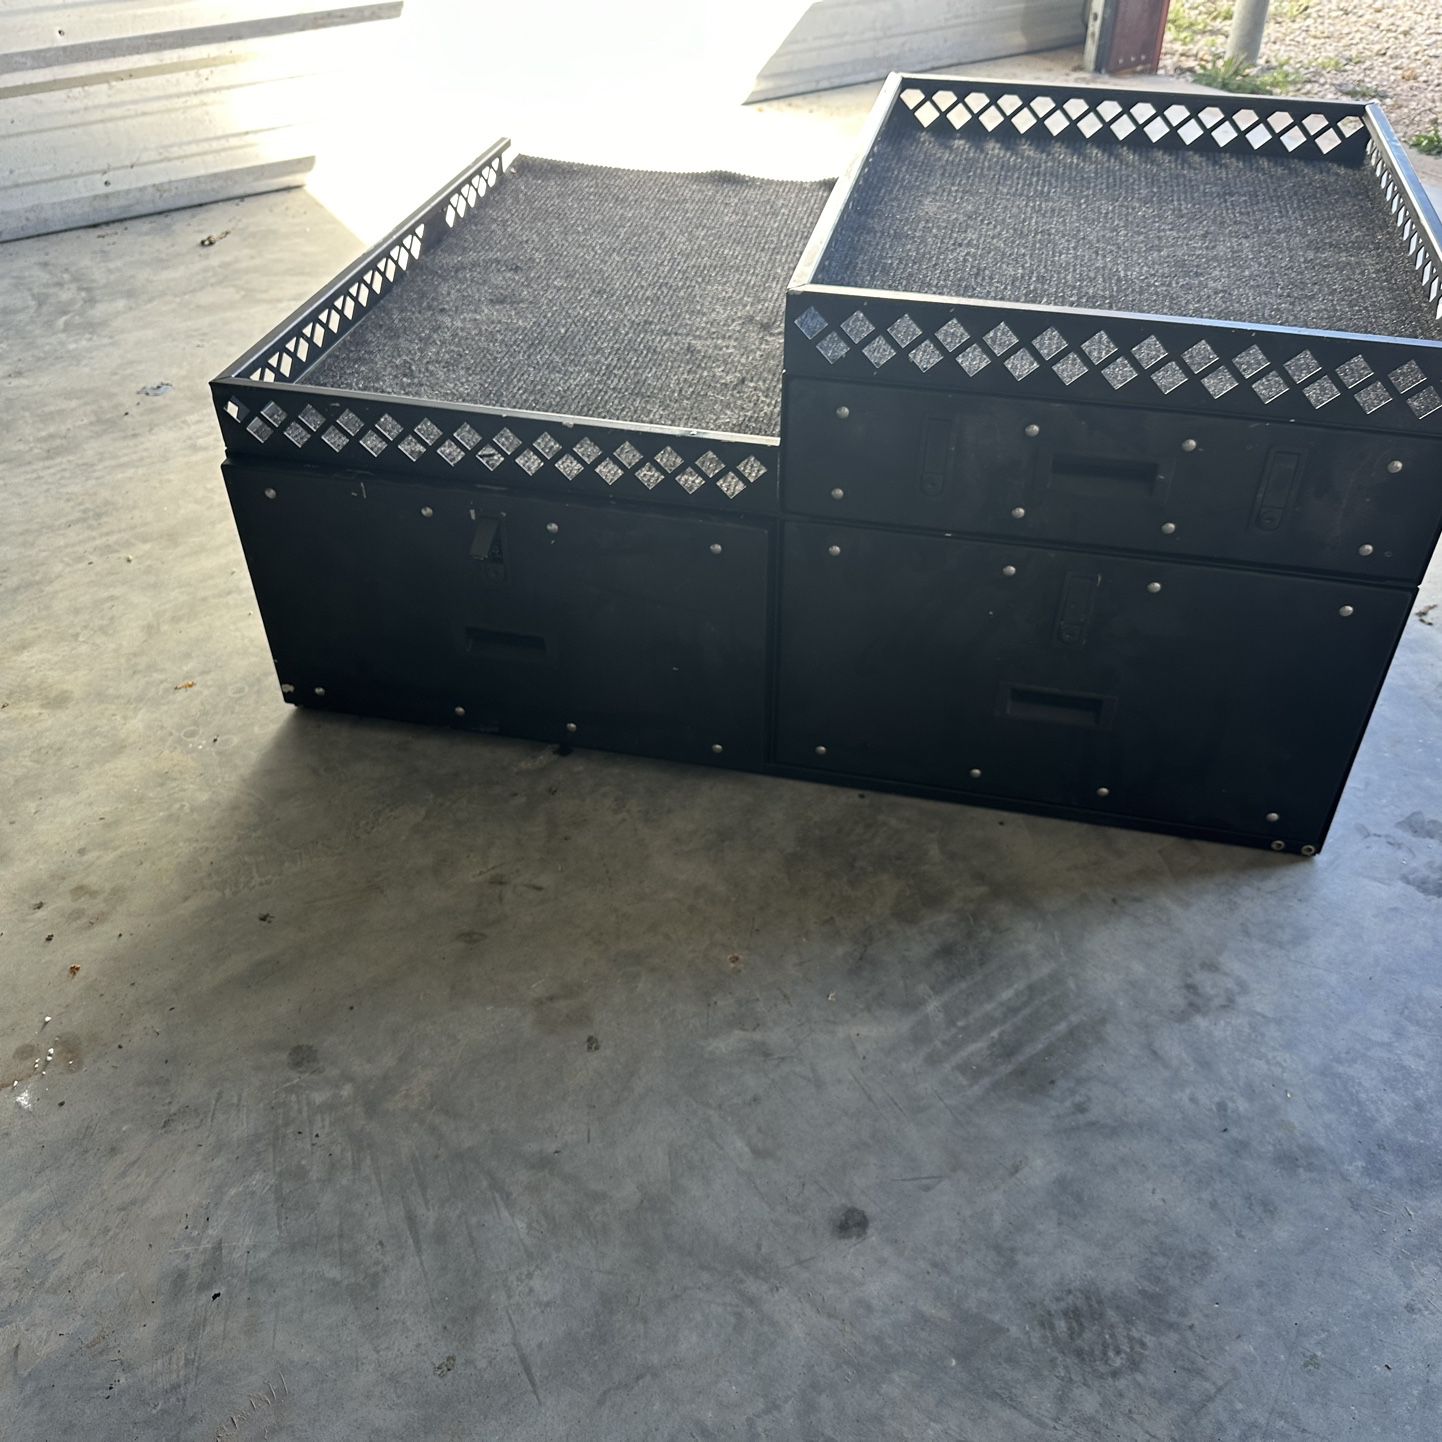 Vault Storage For Police Tahoe Or Truck